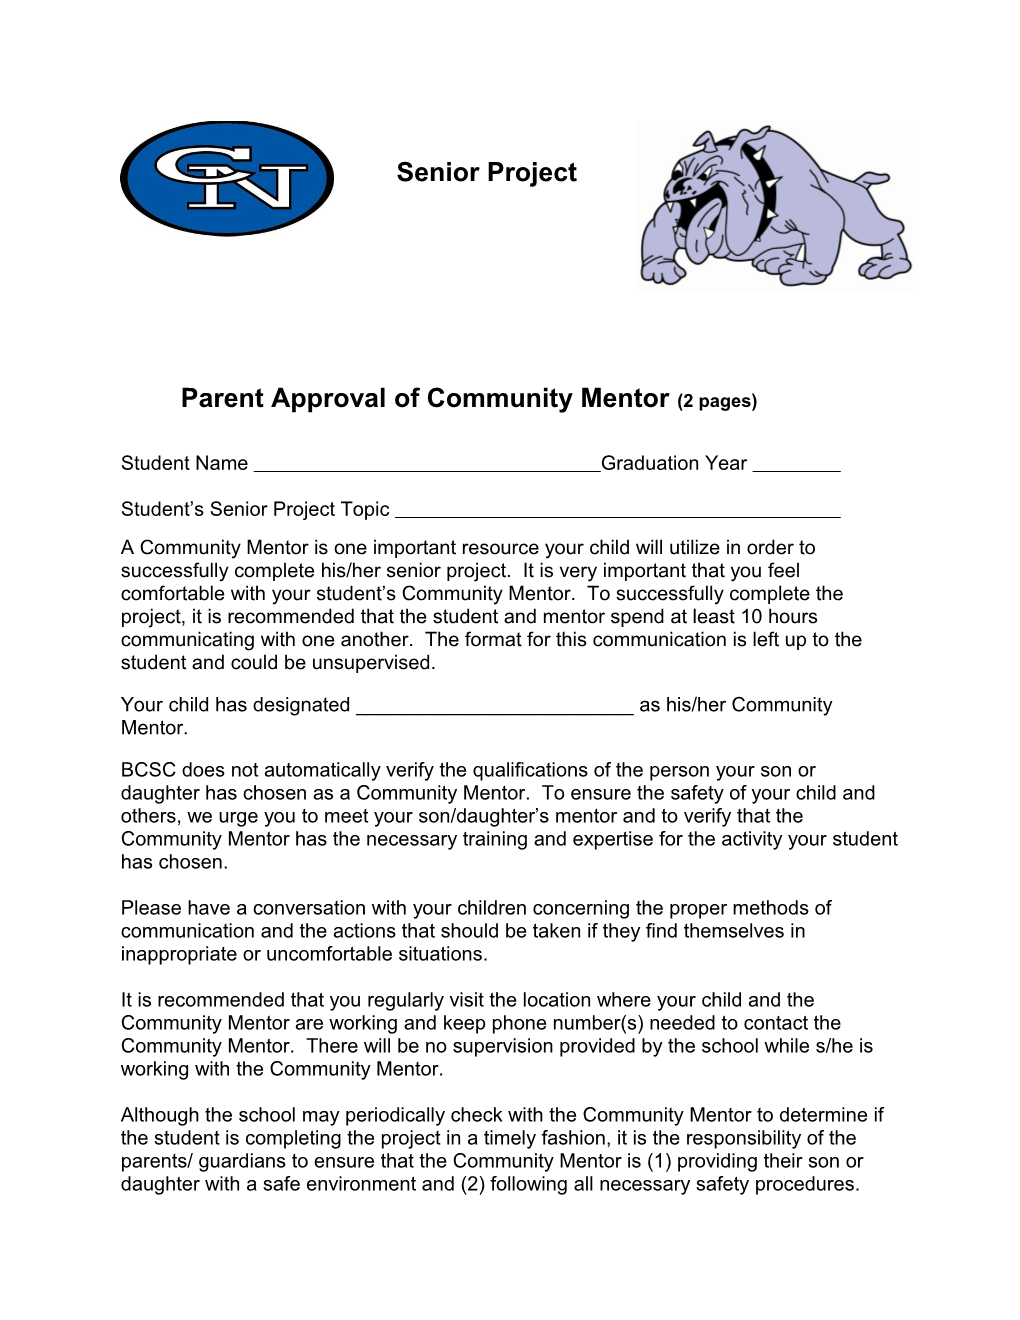 Parent Approval of Community Mentor (2 Pages)